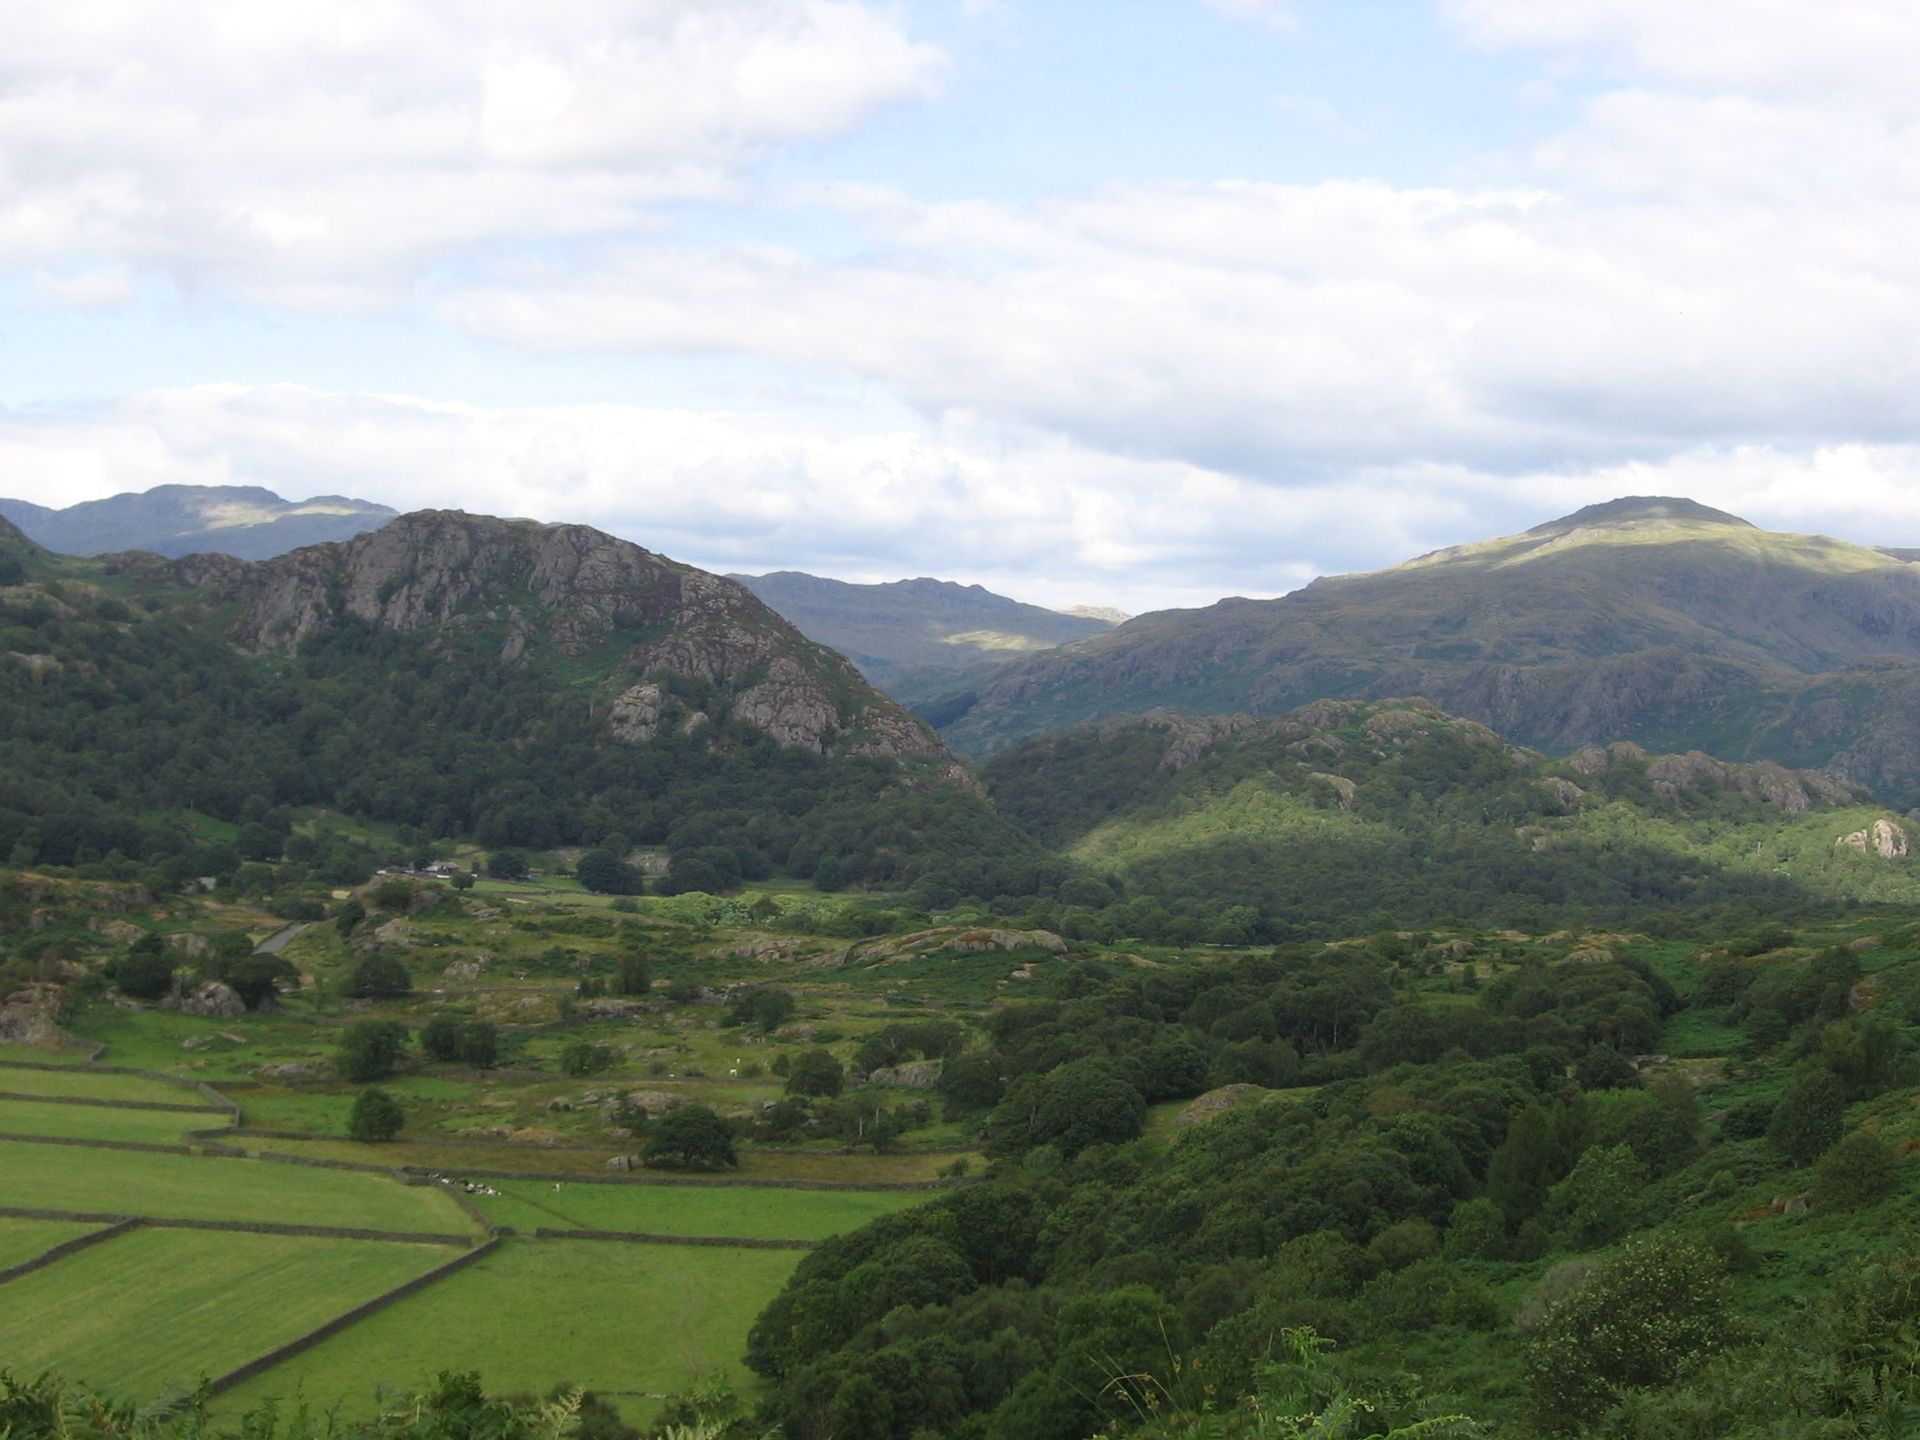 View of Eskdale from Duddon Valley